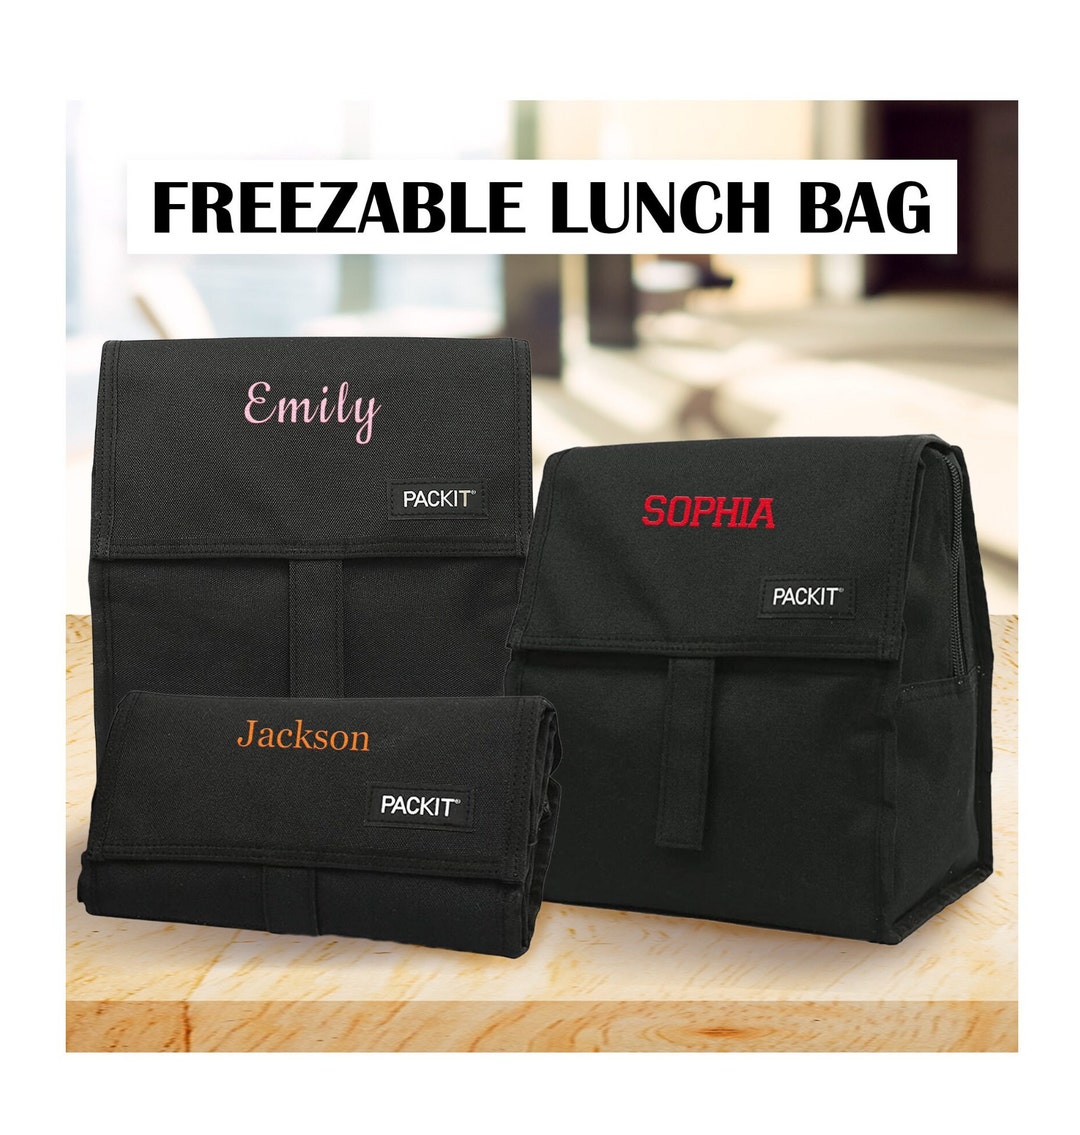 Customized Freezable Lunch Bag with Zip Closure Rolled up Stored